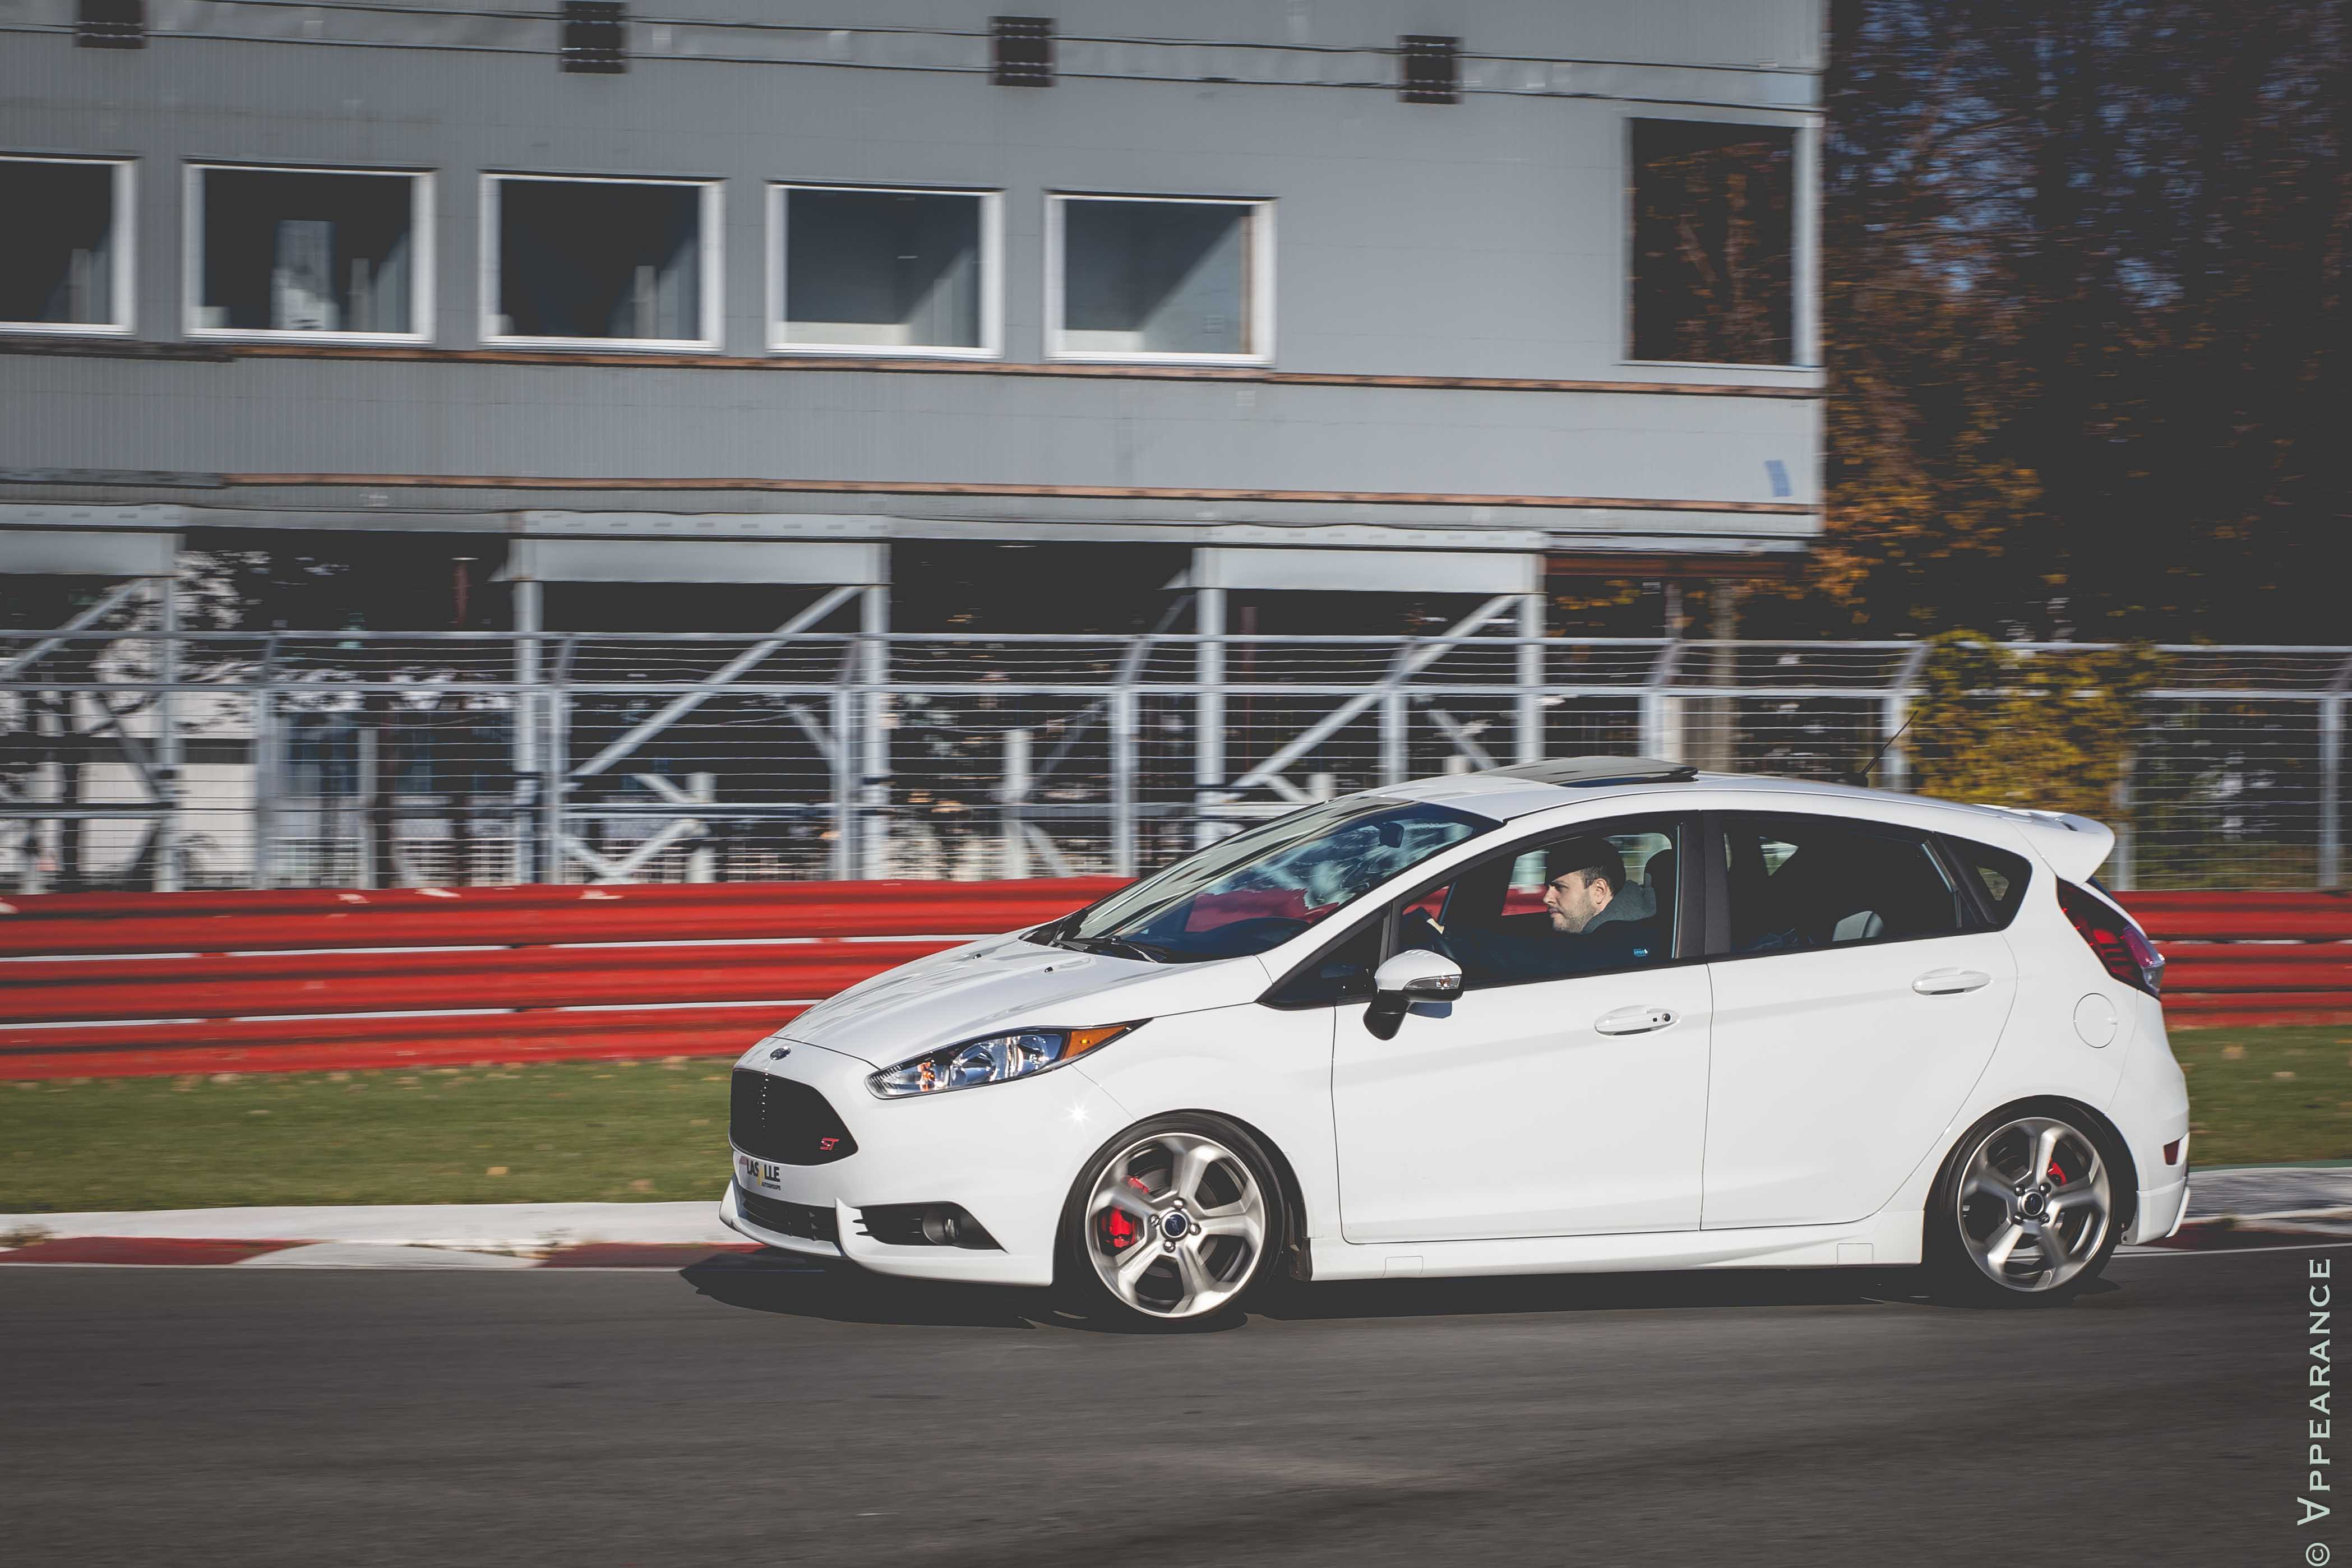 2016 Ford Fiesta ST: The Most Performance for the Price?